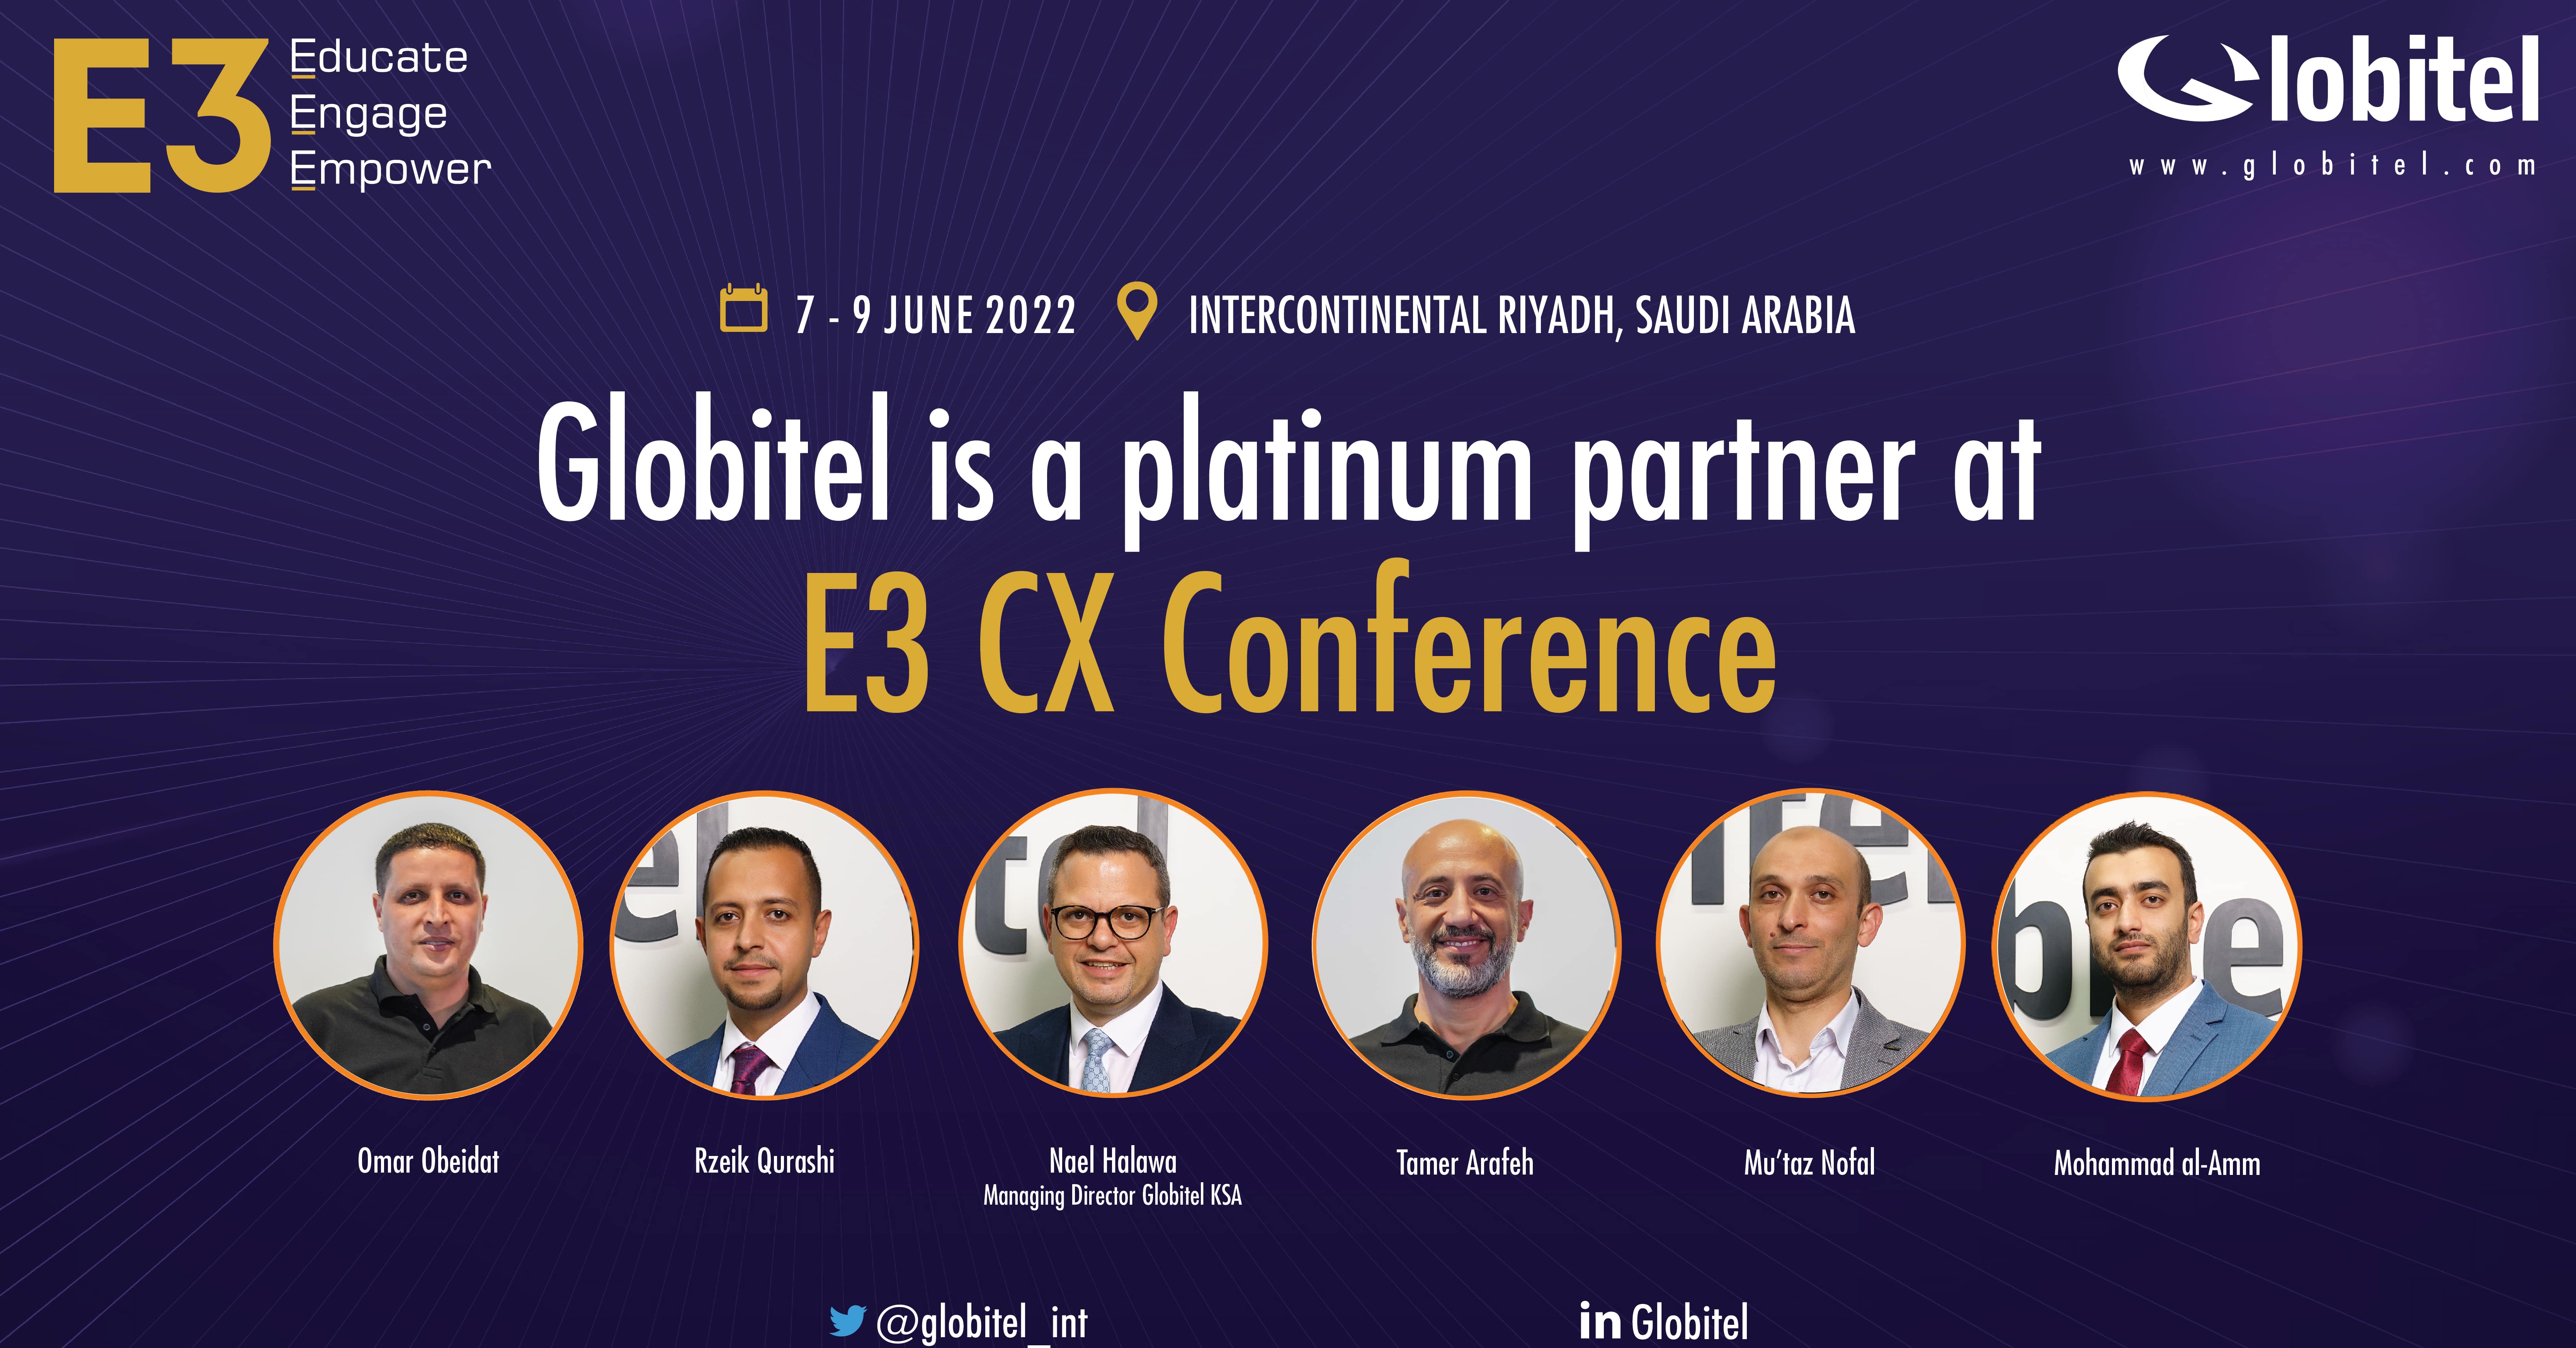 Globitel is a platinum partner at E3 CX Conference 2022 in Riyadh on